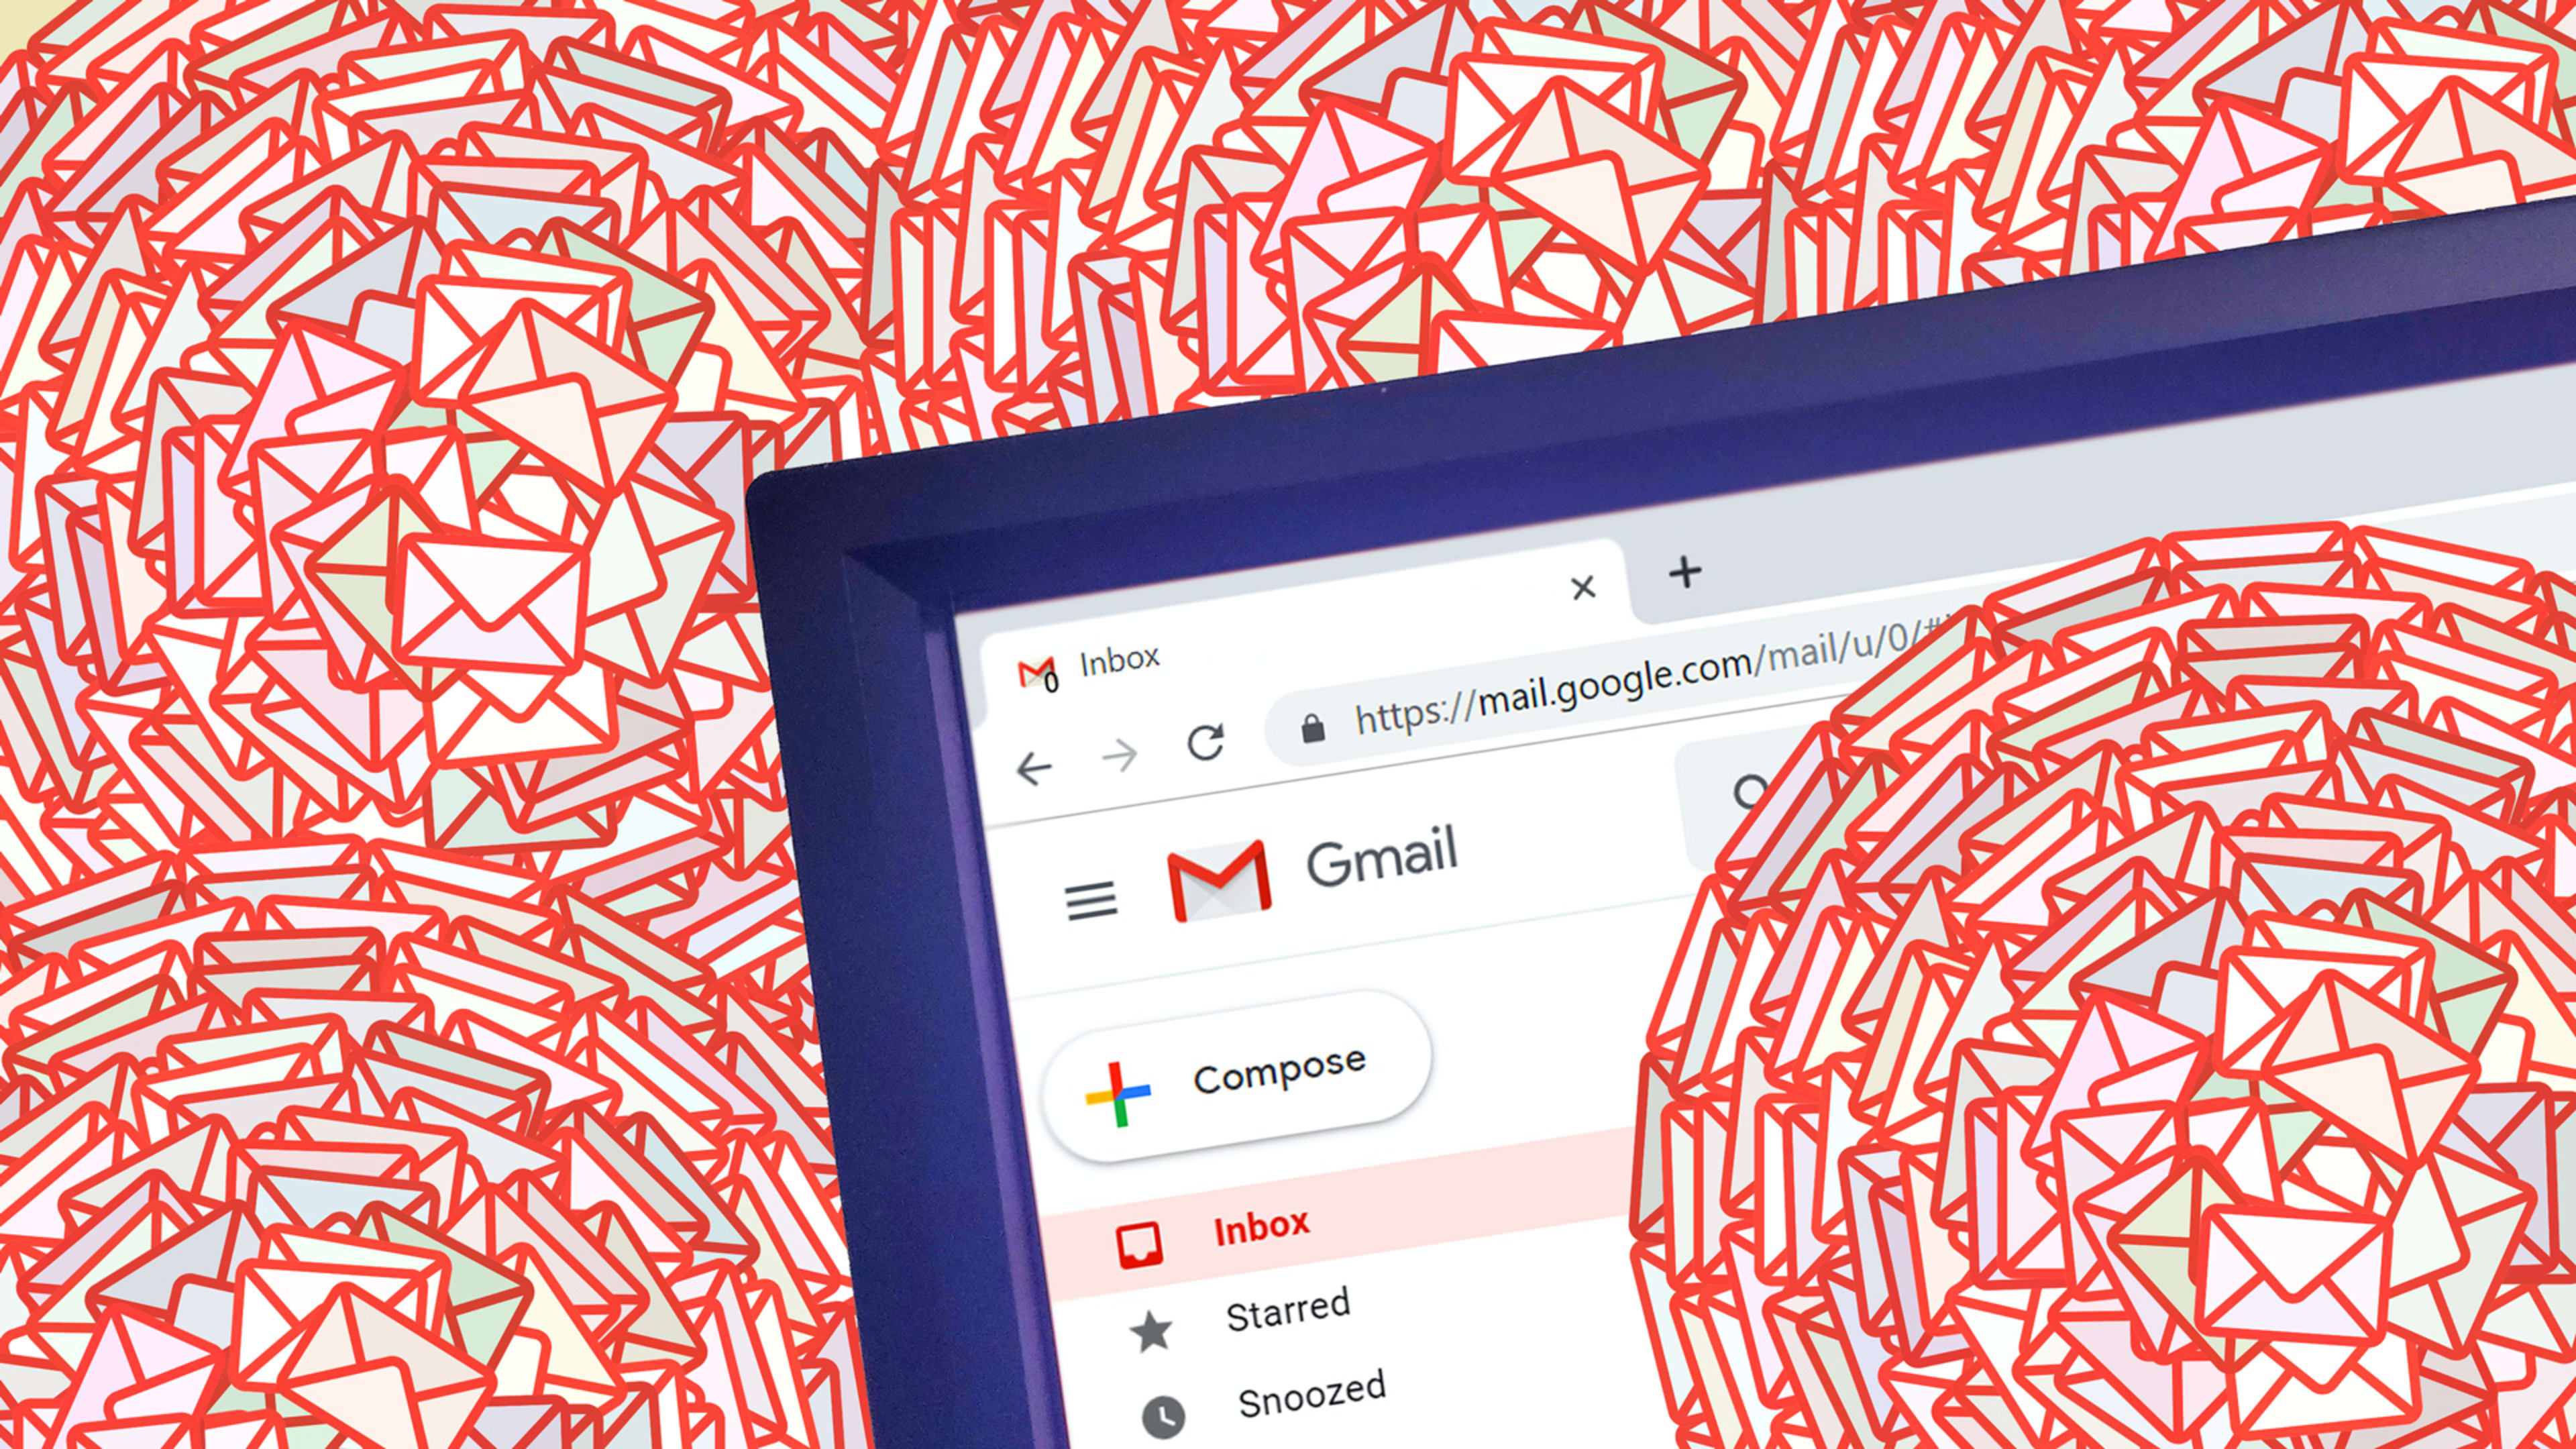 This next-level hack trains Gmail to work the way you think